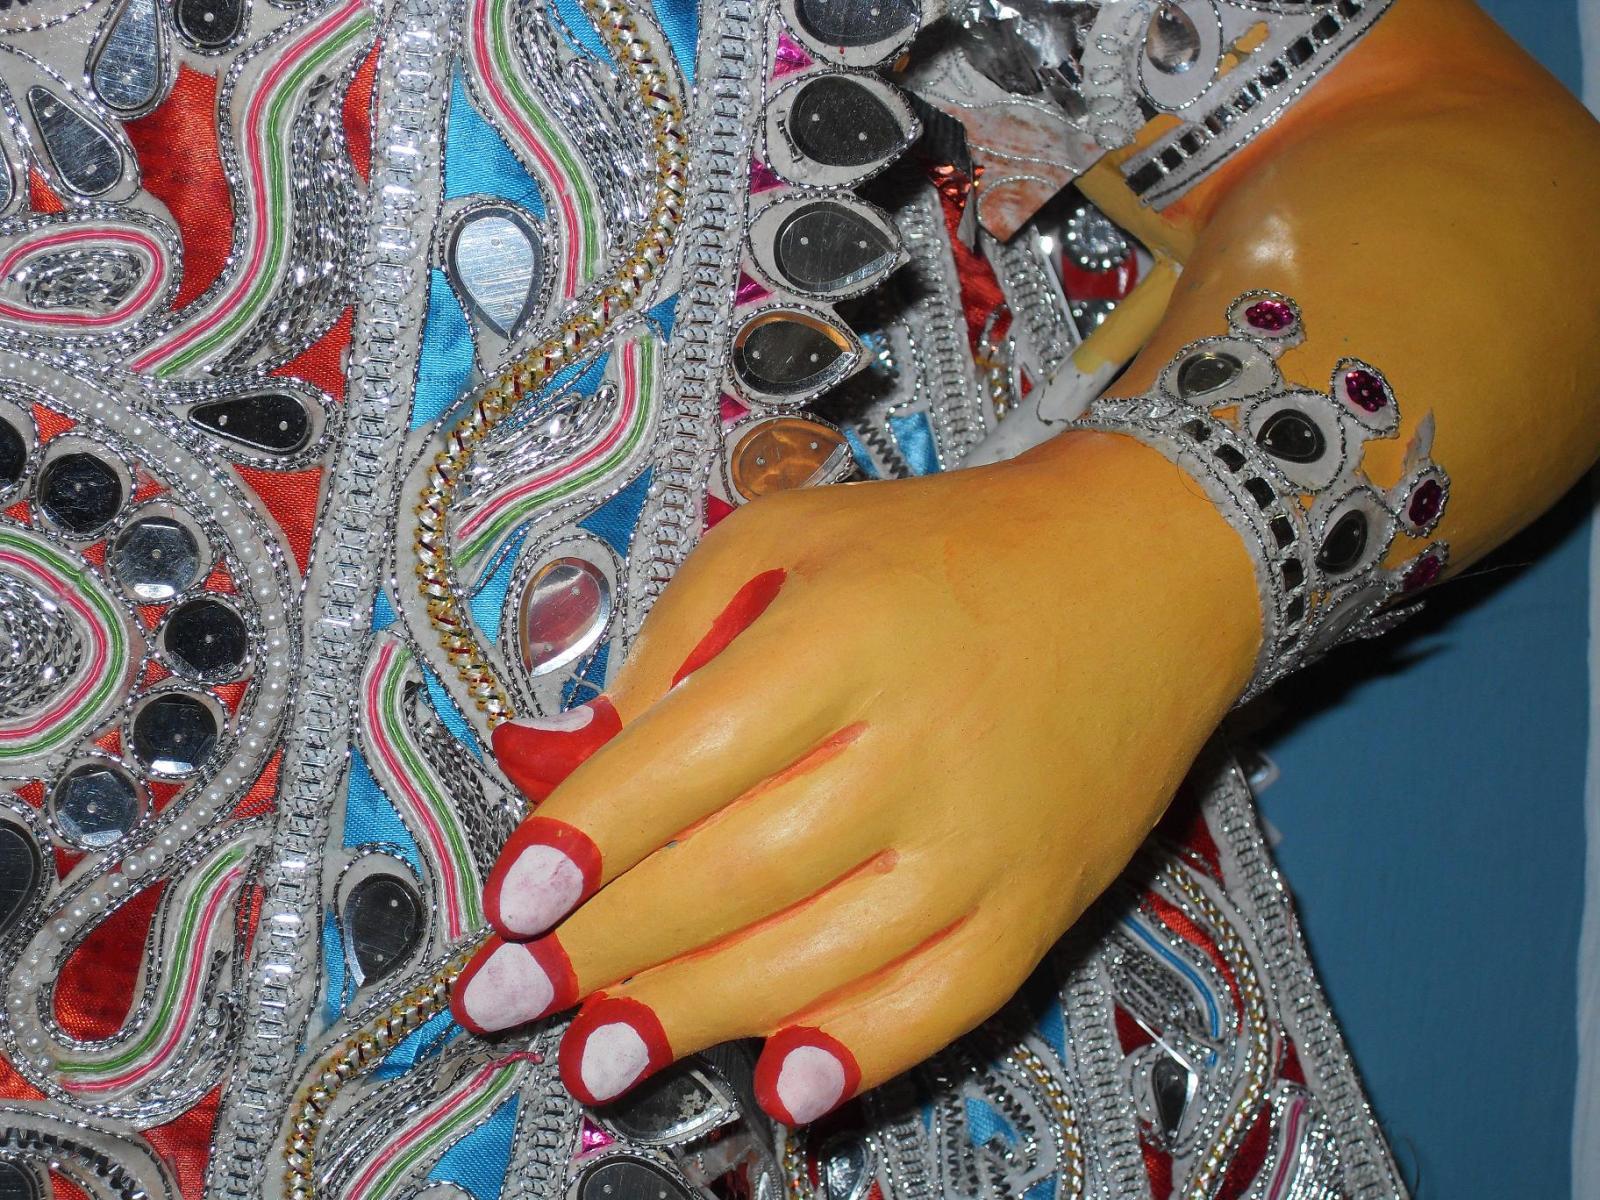 A close-up of Lakshmi's hand and costume